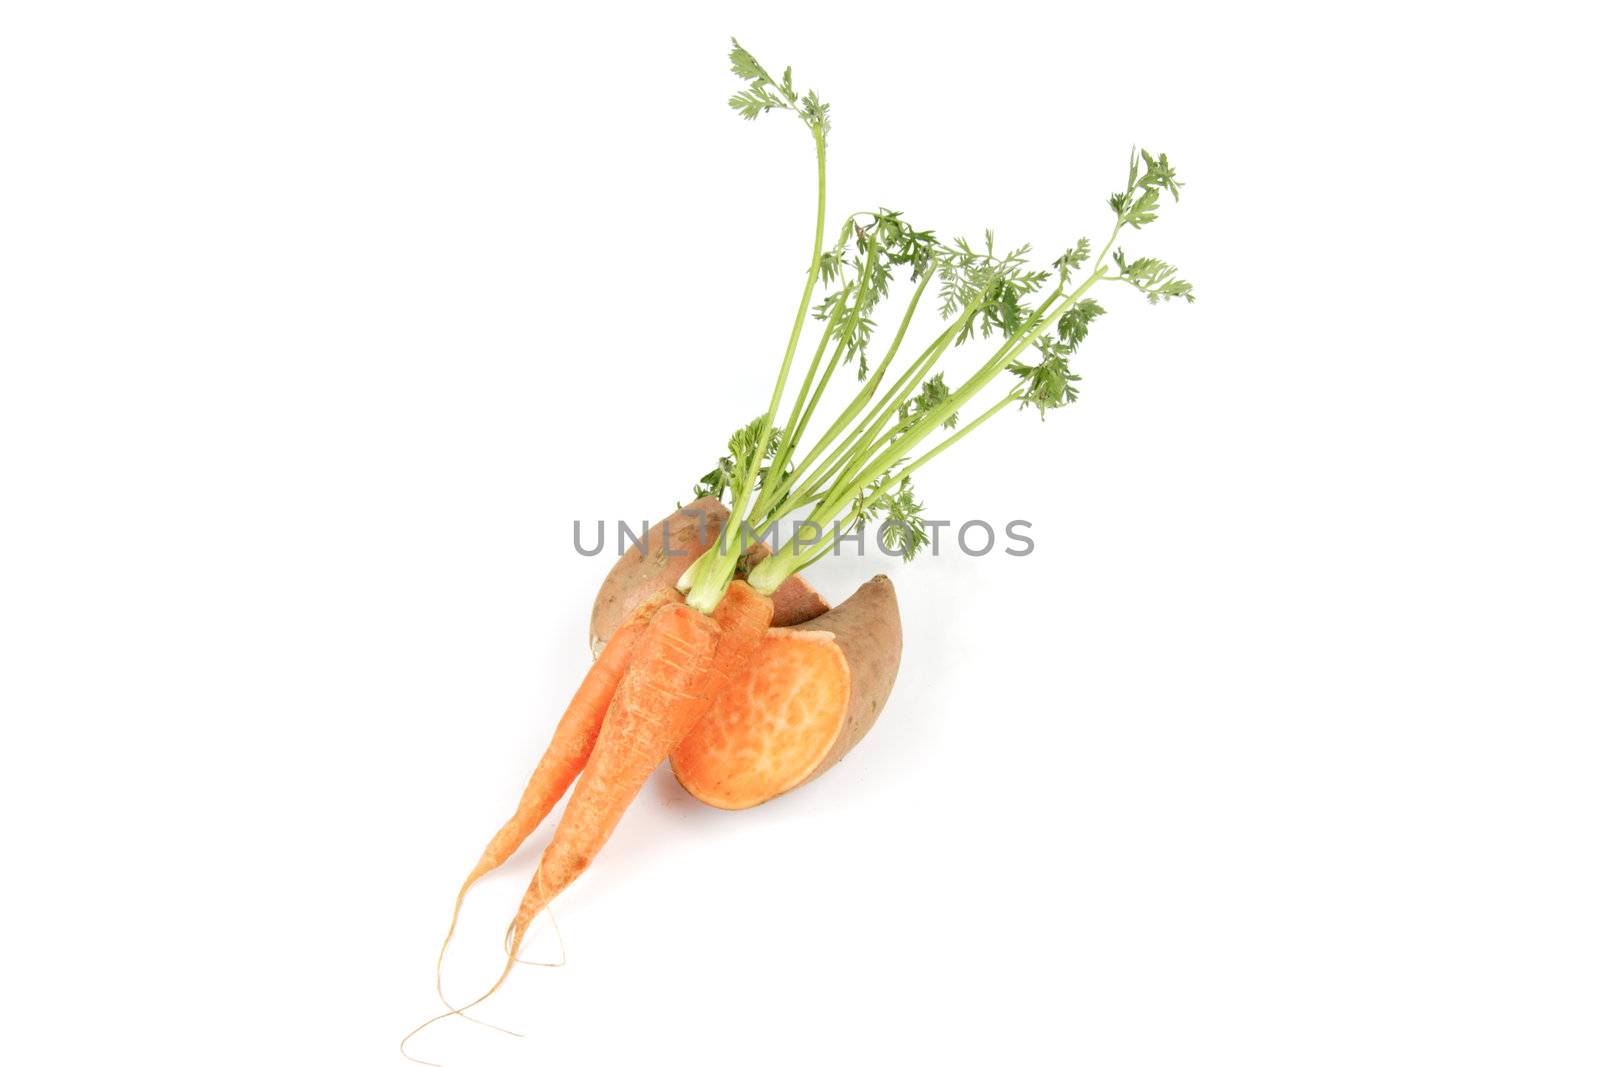 Sweet Potato cut in half with a bunch of raw carrots on a reflective white background